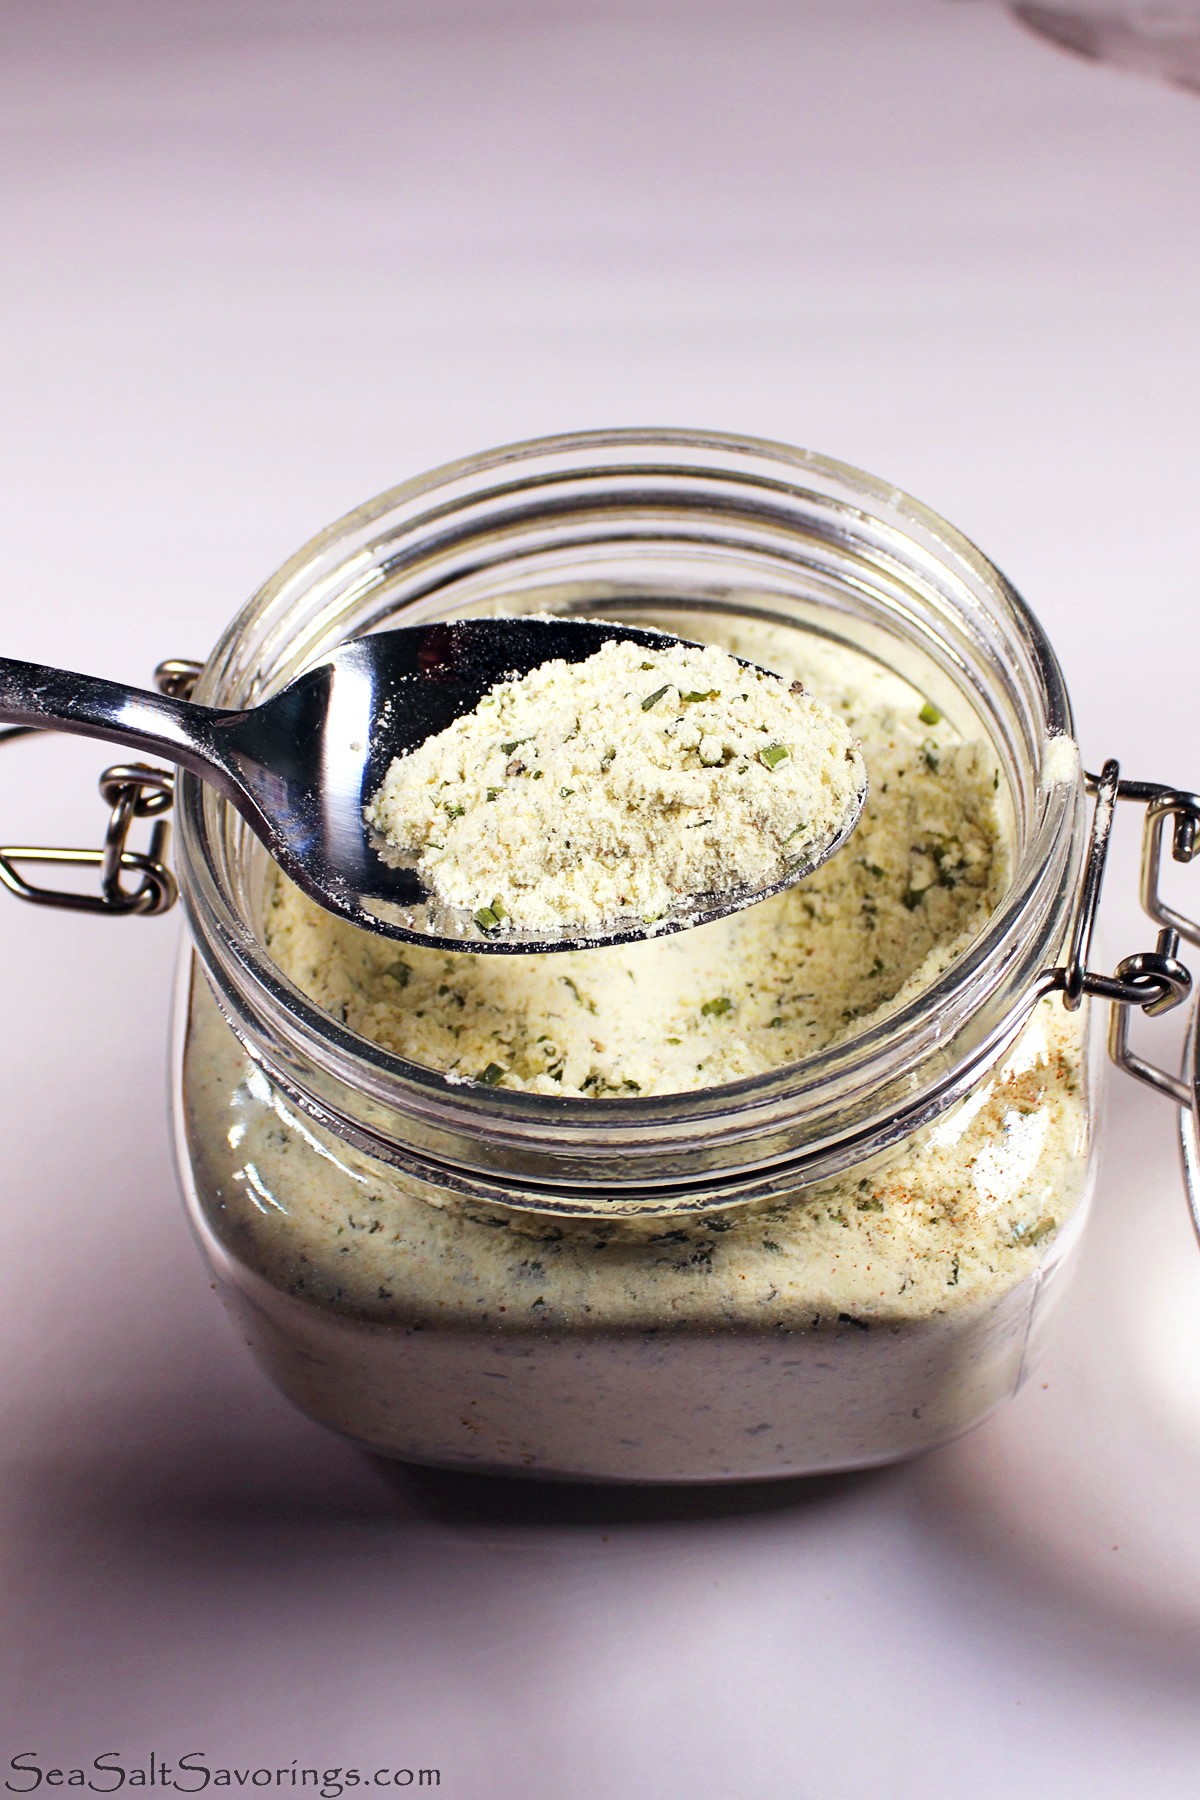 spoonful of ranch seasoning from a glass jar